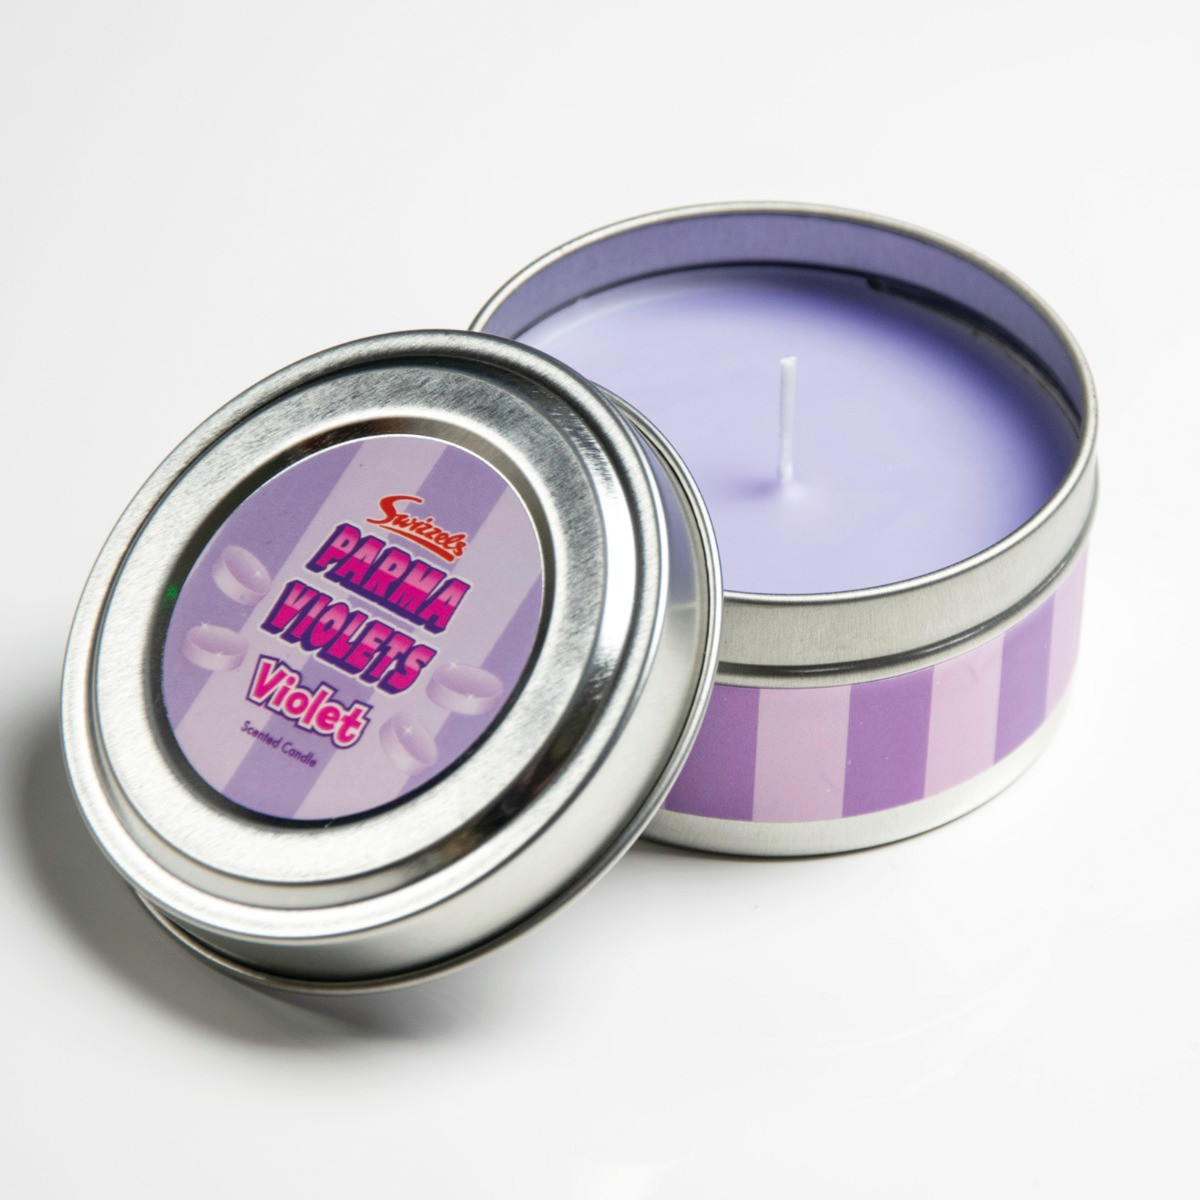 Swizzels Scented Candle 3oz Tin - Parma Violets>